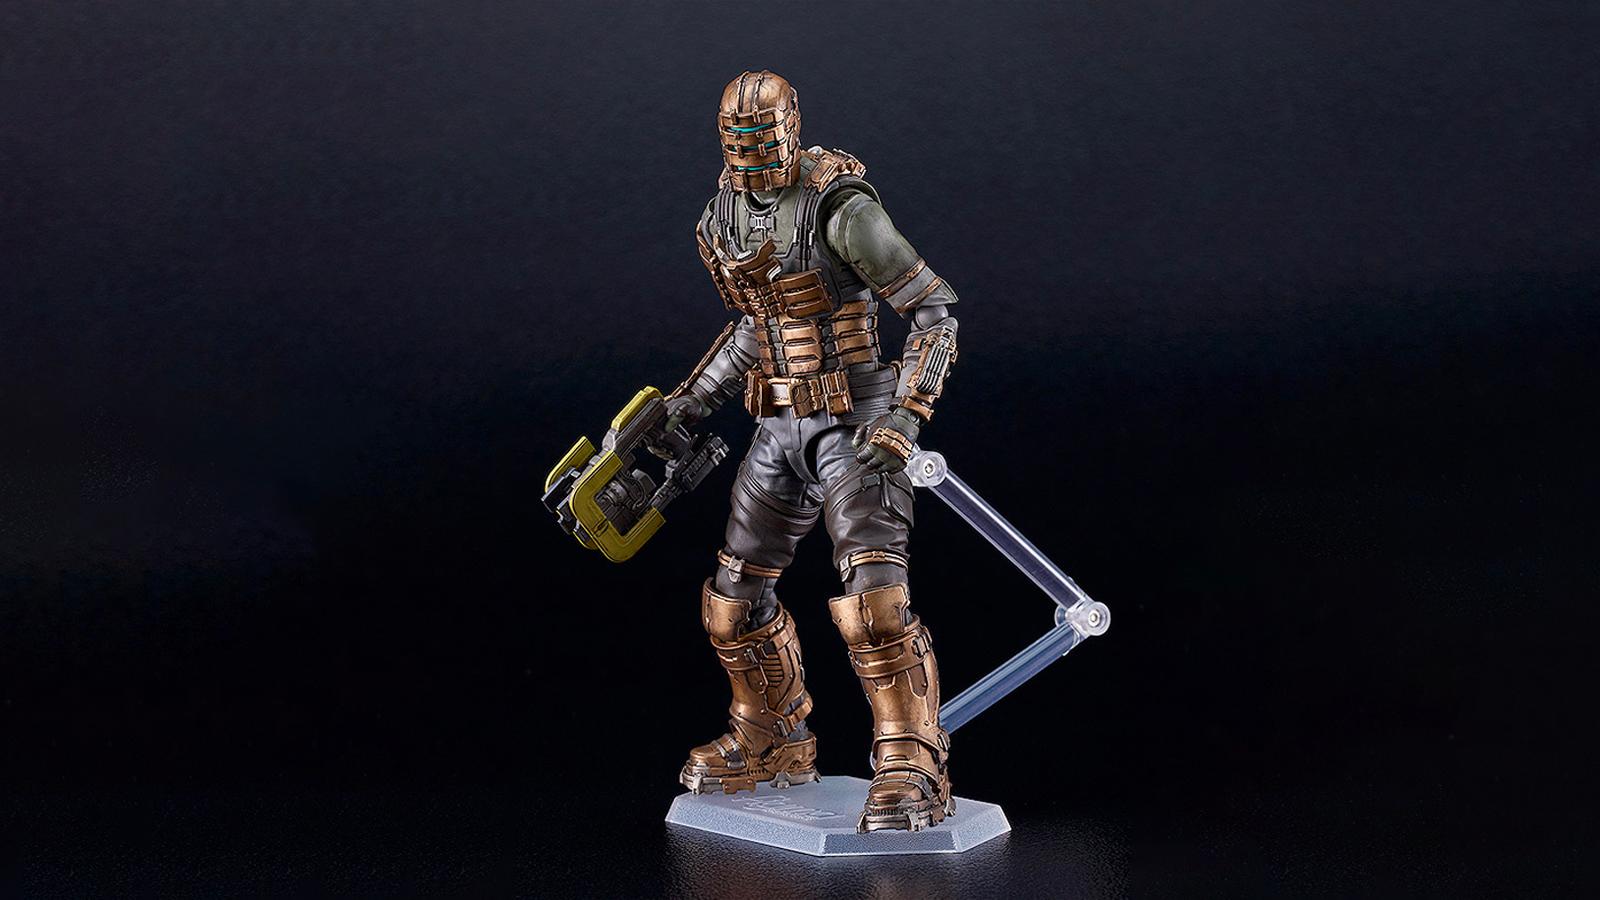 dead space's isaac clarke figma figure on black background and stand